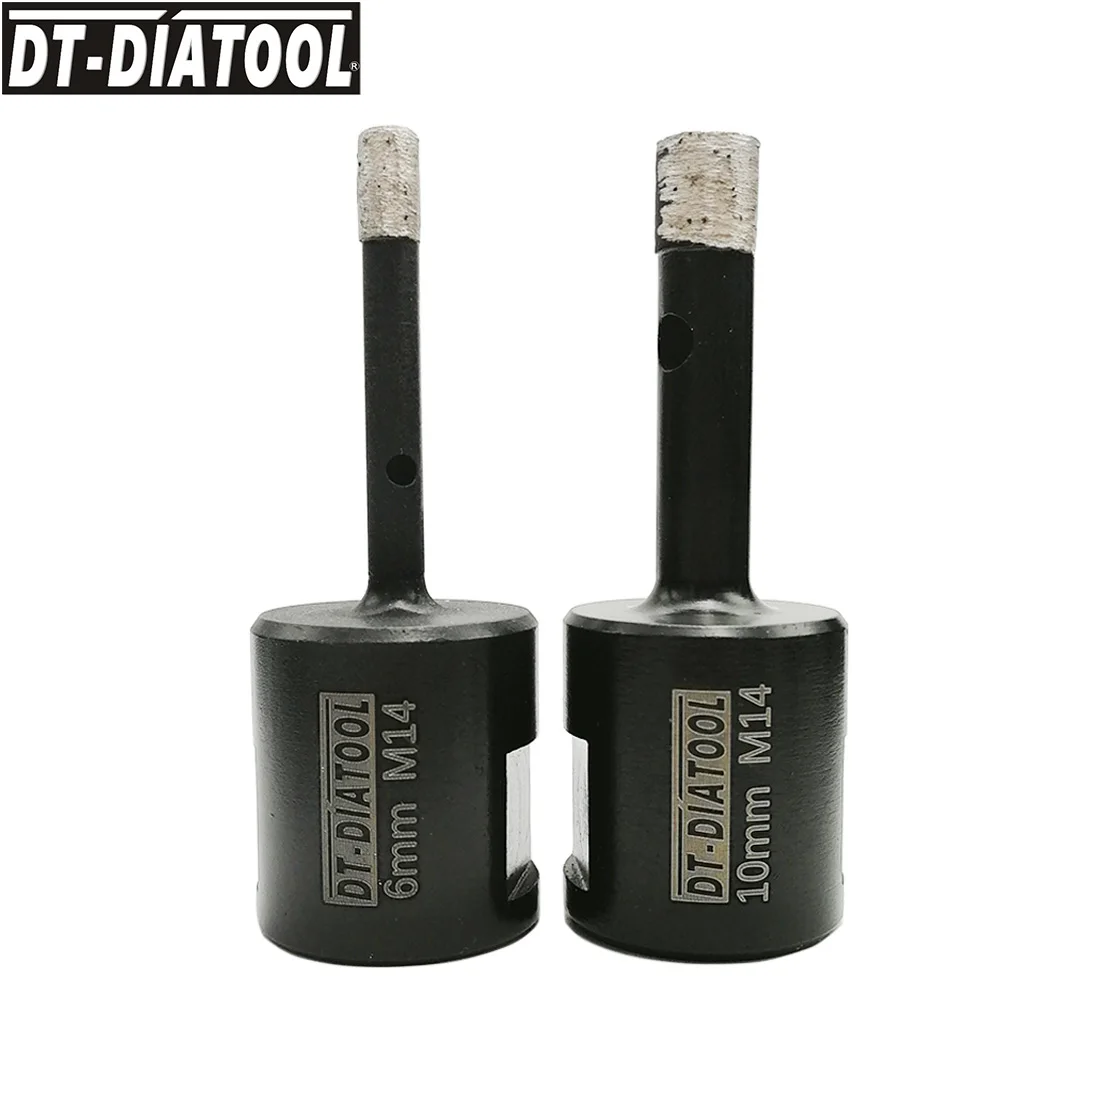 DT-DIATOOL 2pcs/Set 6+10mm M14 Diamond Wet Welded Solid Segments Drilling Core Bits Drill Bits Hole Saw For Granite Stone Marble